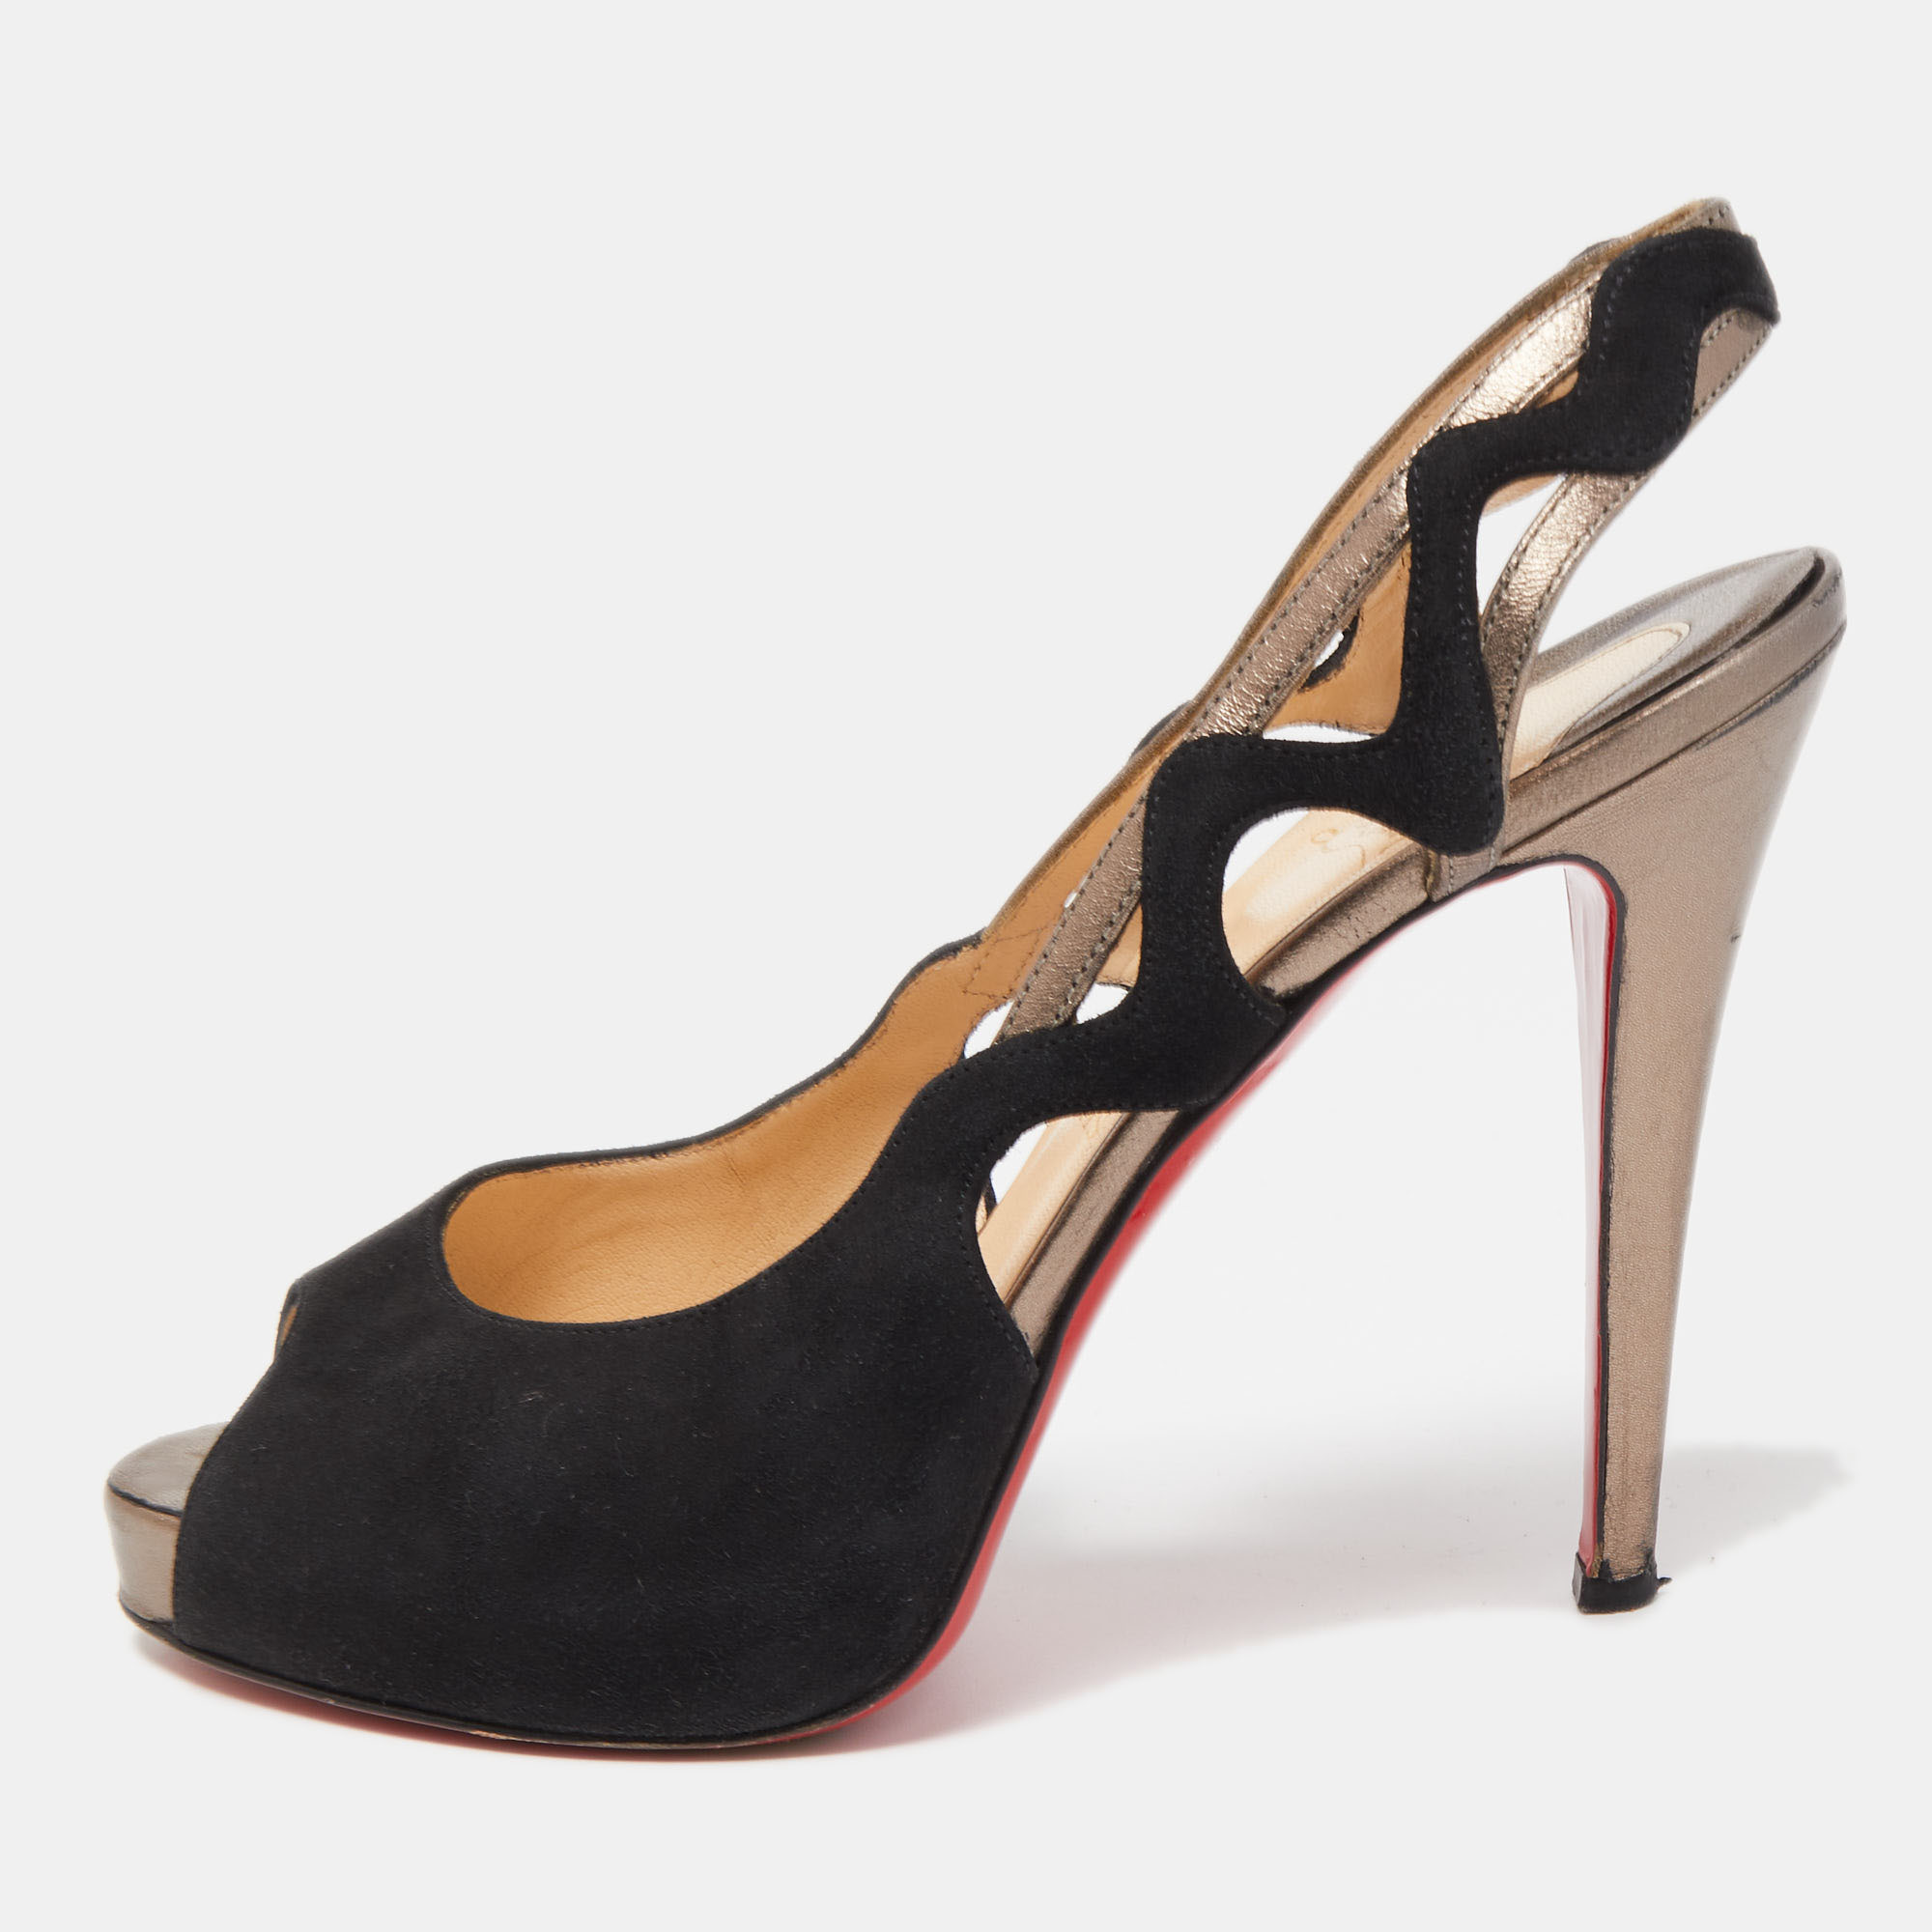 Pre-owned Christian Louboutin Black Suede And Leather Slingback Pumps Size 38.5